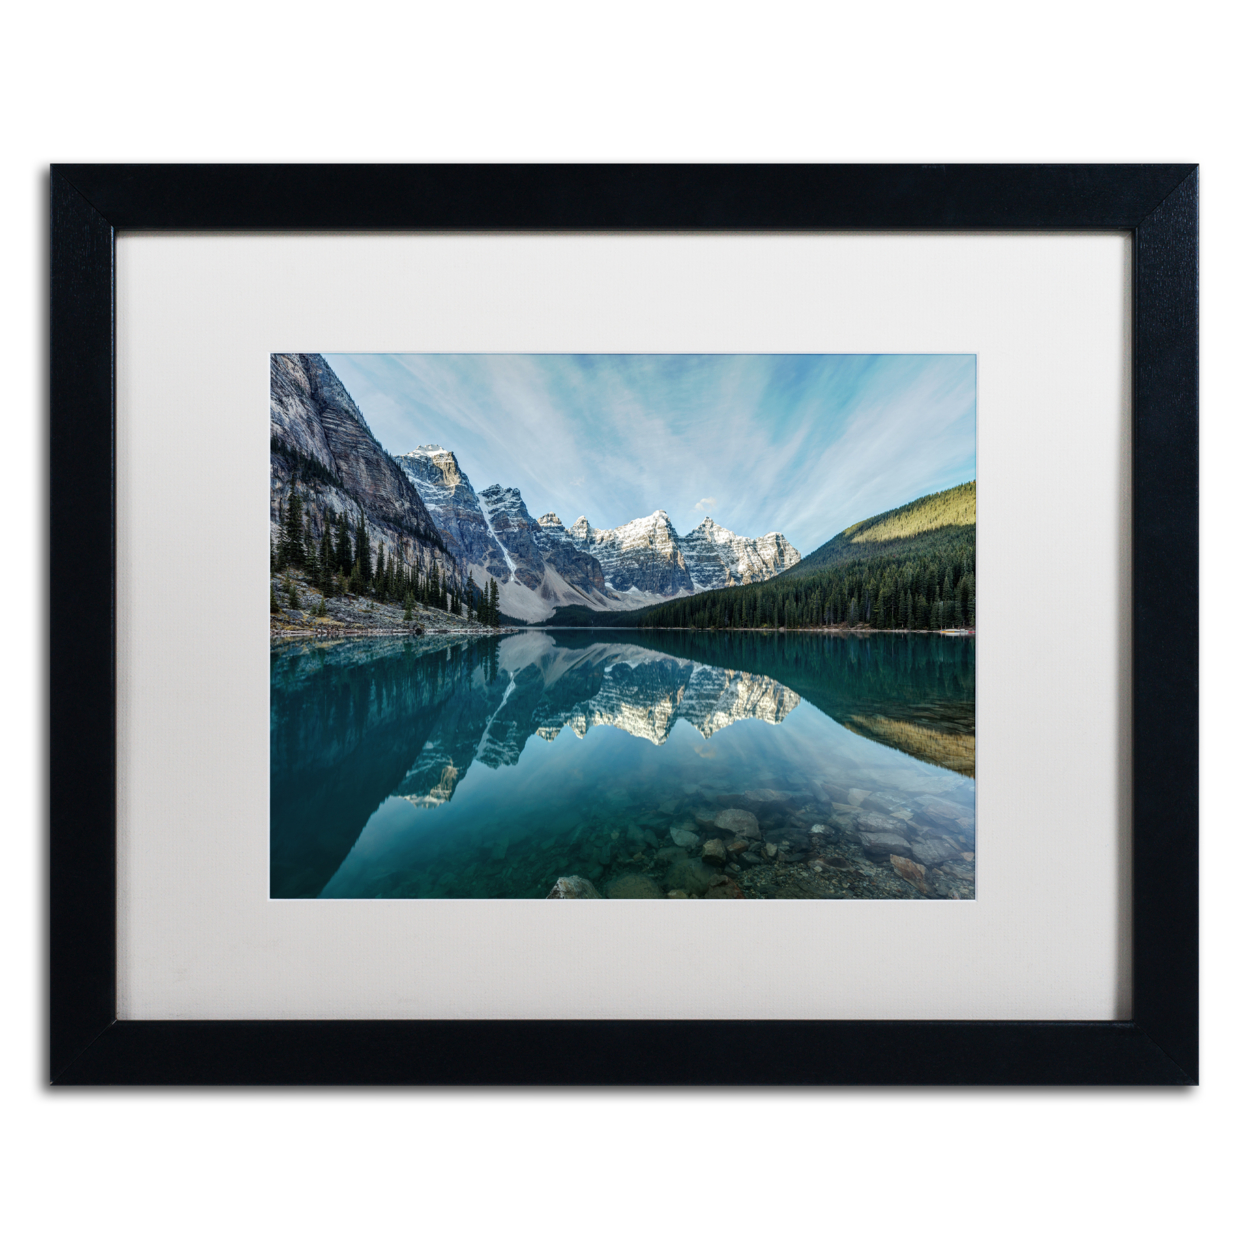 Pierre Leclerc 'Moraine Lake Reflection' Black Wooden Framed Art 18 X 22 Inches